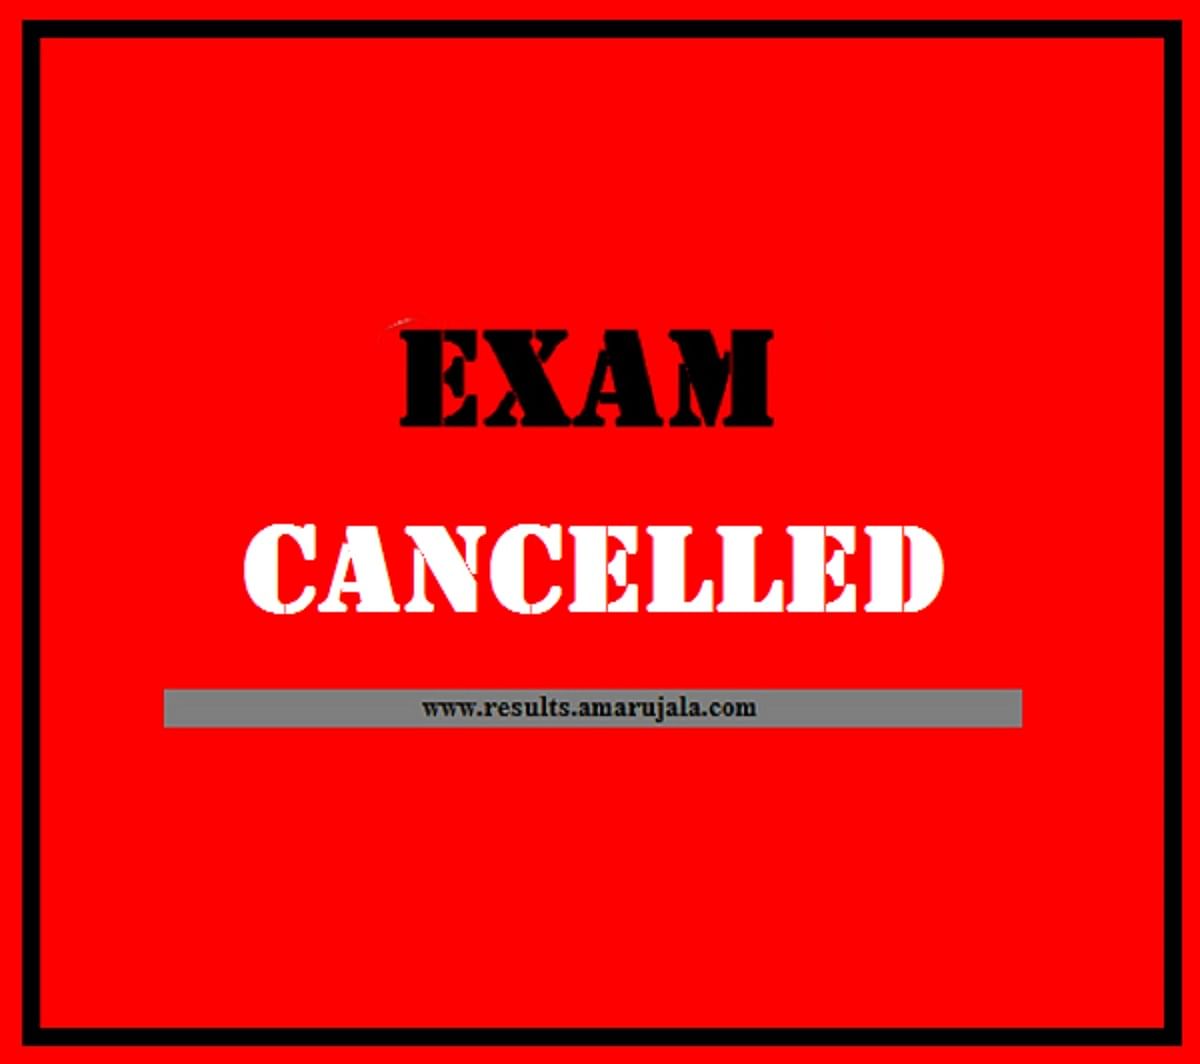 PSEB 12th Board Exam 2021 Cancelled, Results on CBSE Evaluation Criteria Basis